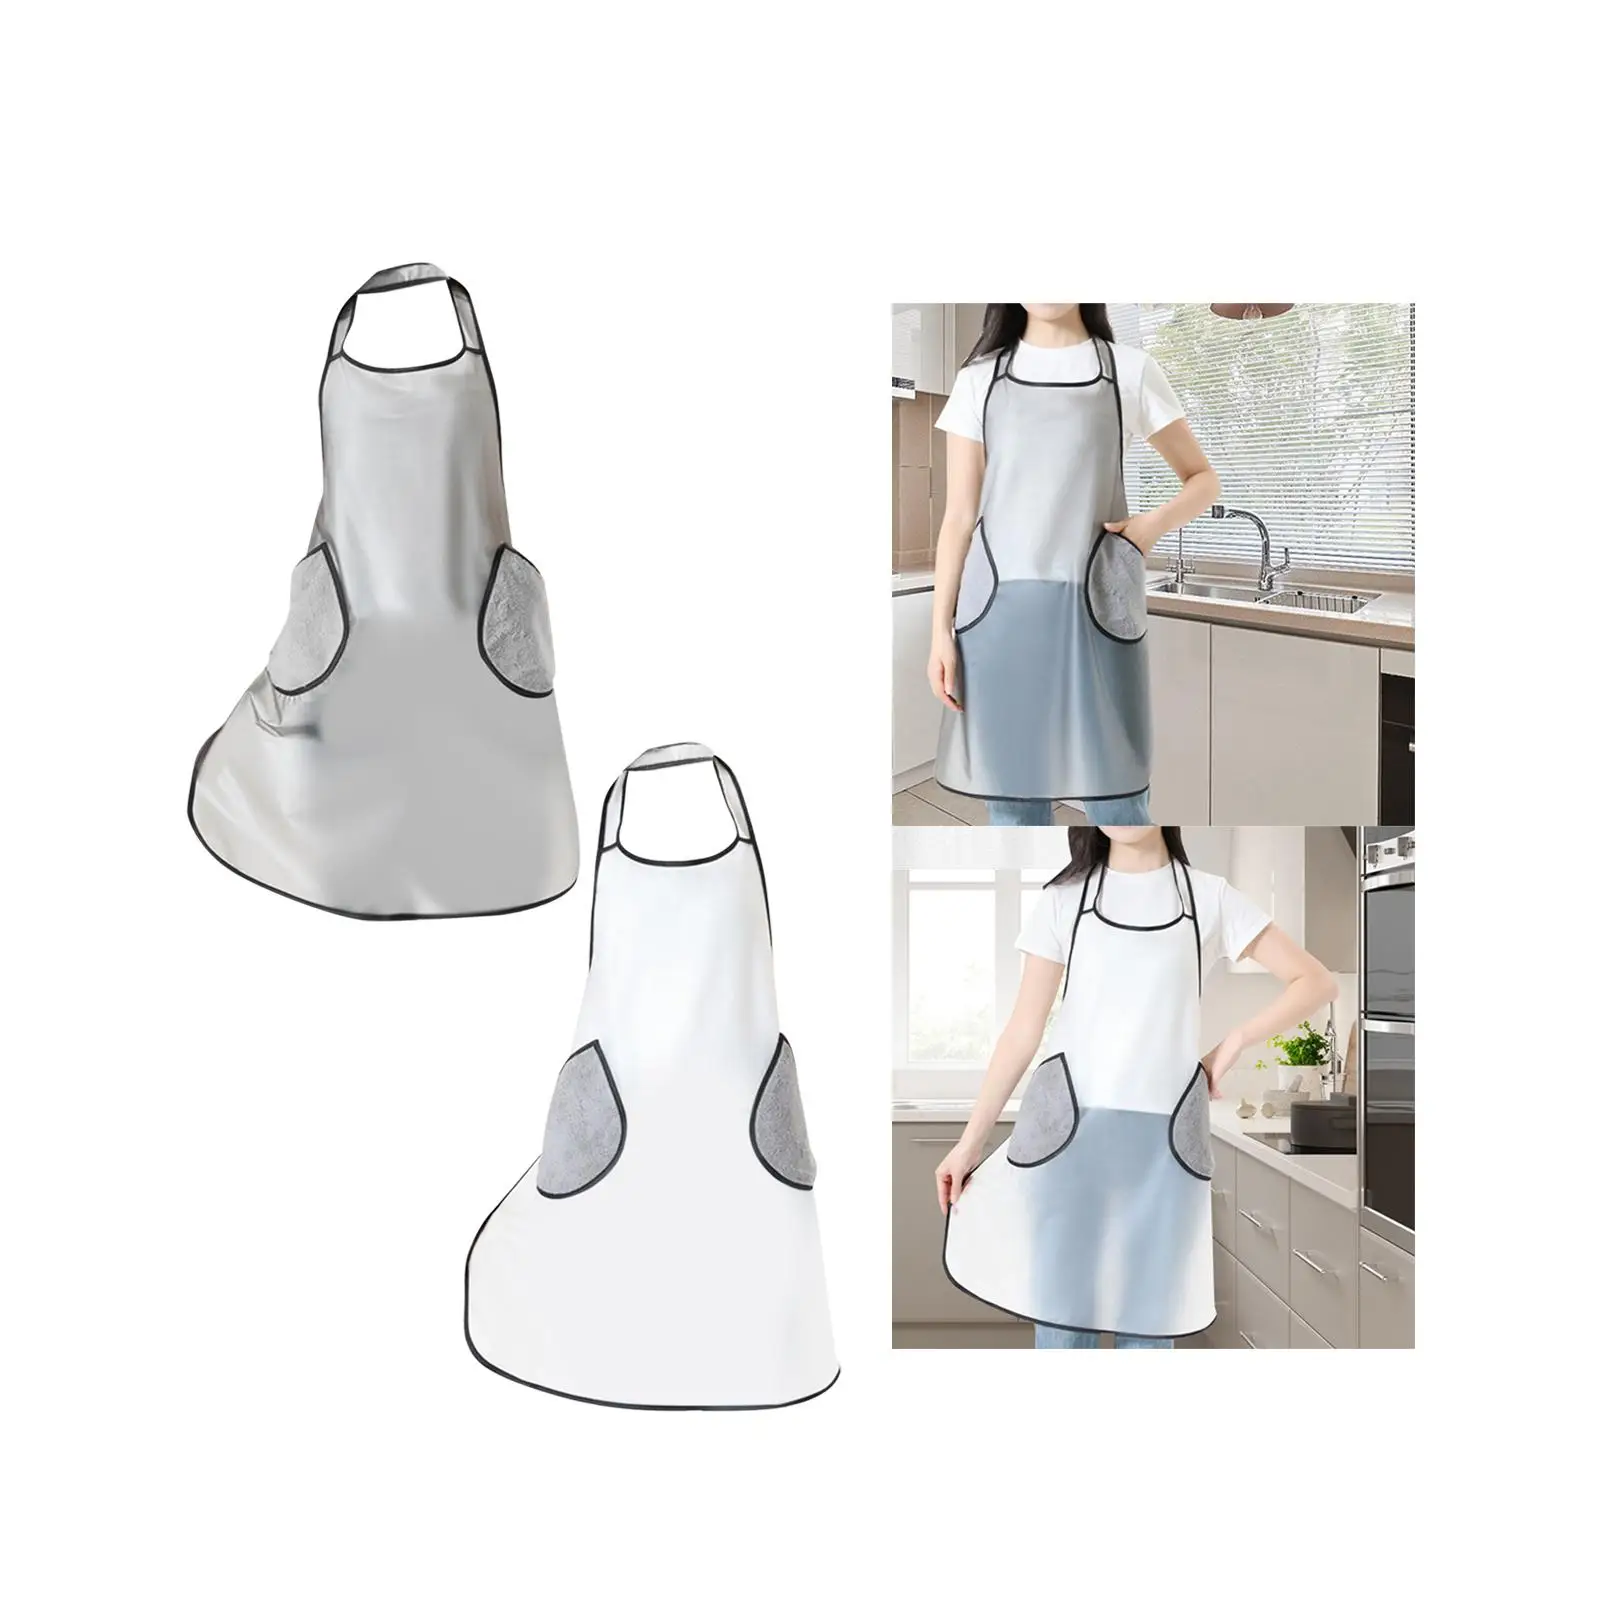 Cooking Apron Baking Apron with Hand Wipe Pockets for Restaurant, Salon Durable Oil Proof BBQ Apron Grilling Apron Works Apron